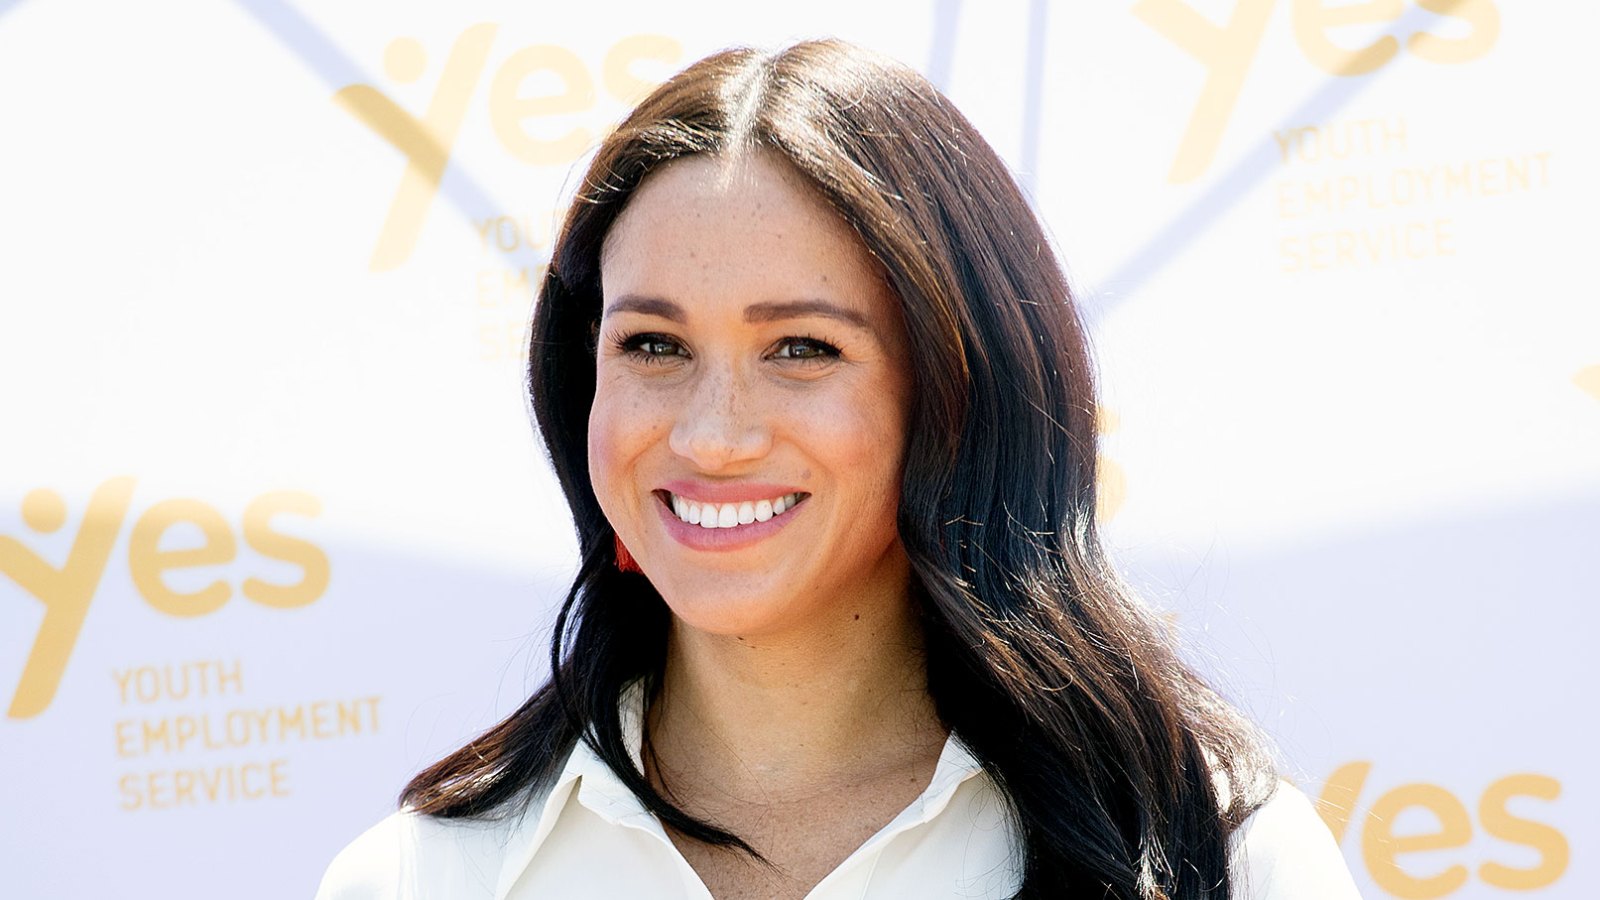 Meghan Markle in Africa Meghan Markle Is Actively Looking for a Manager or Agent After Royal Exit